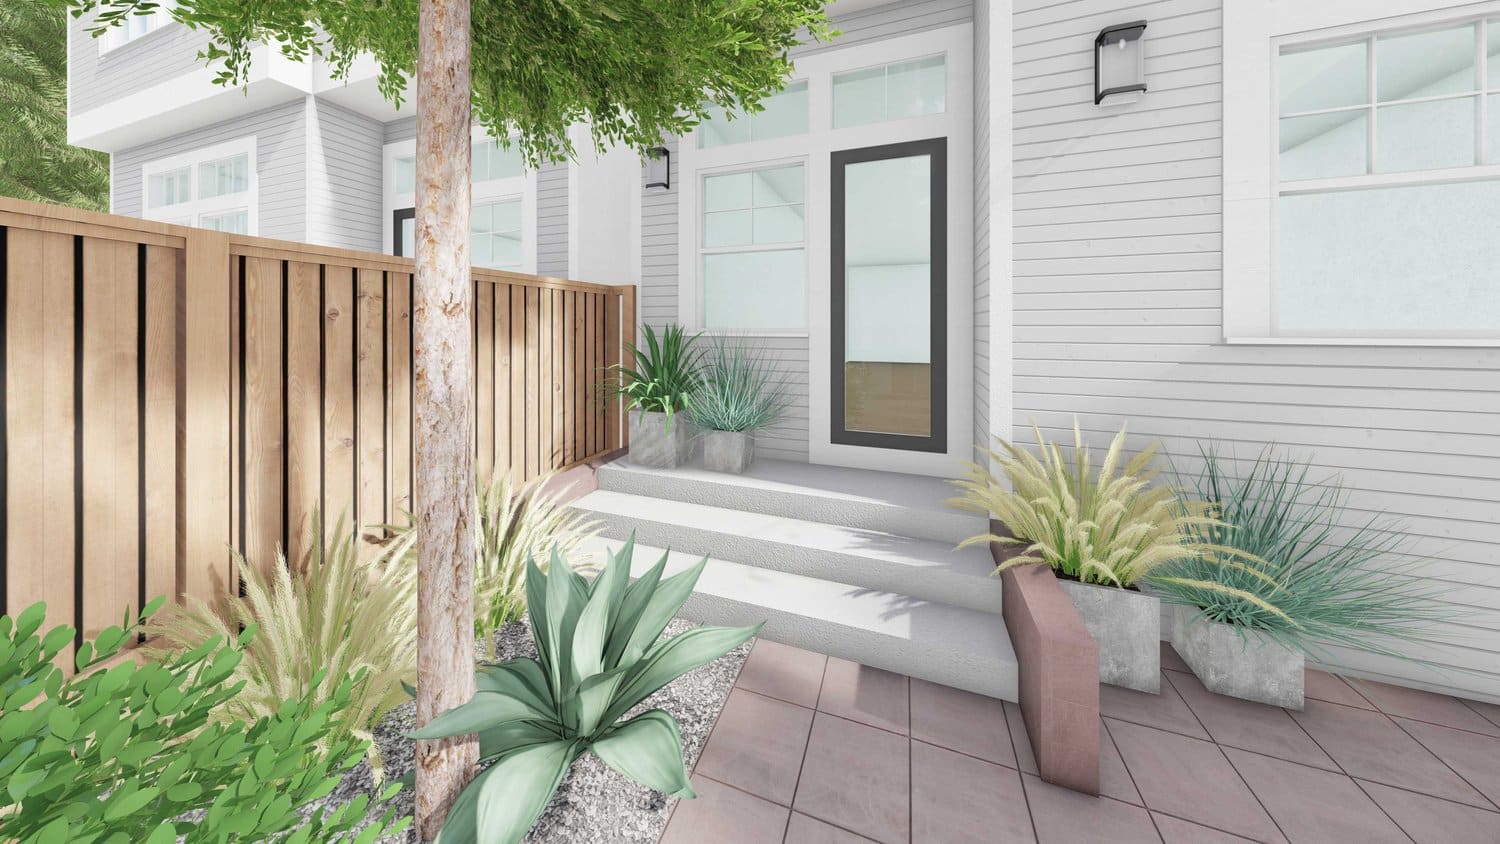 Sacramento front yard with concrete paver flooring, concrete steps, plants and tree in gravel, and planters